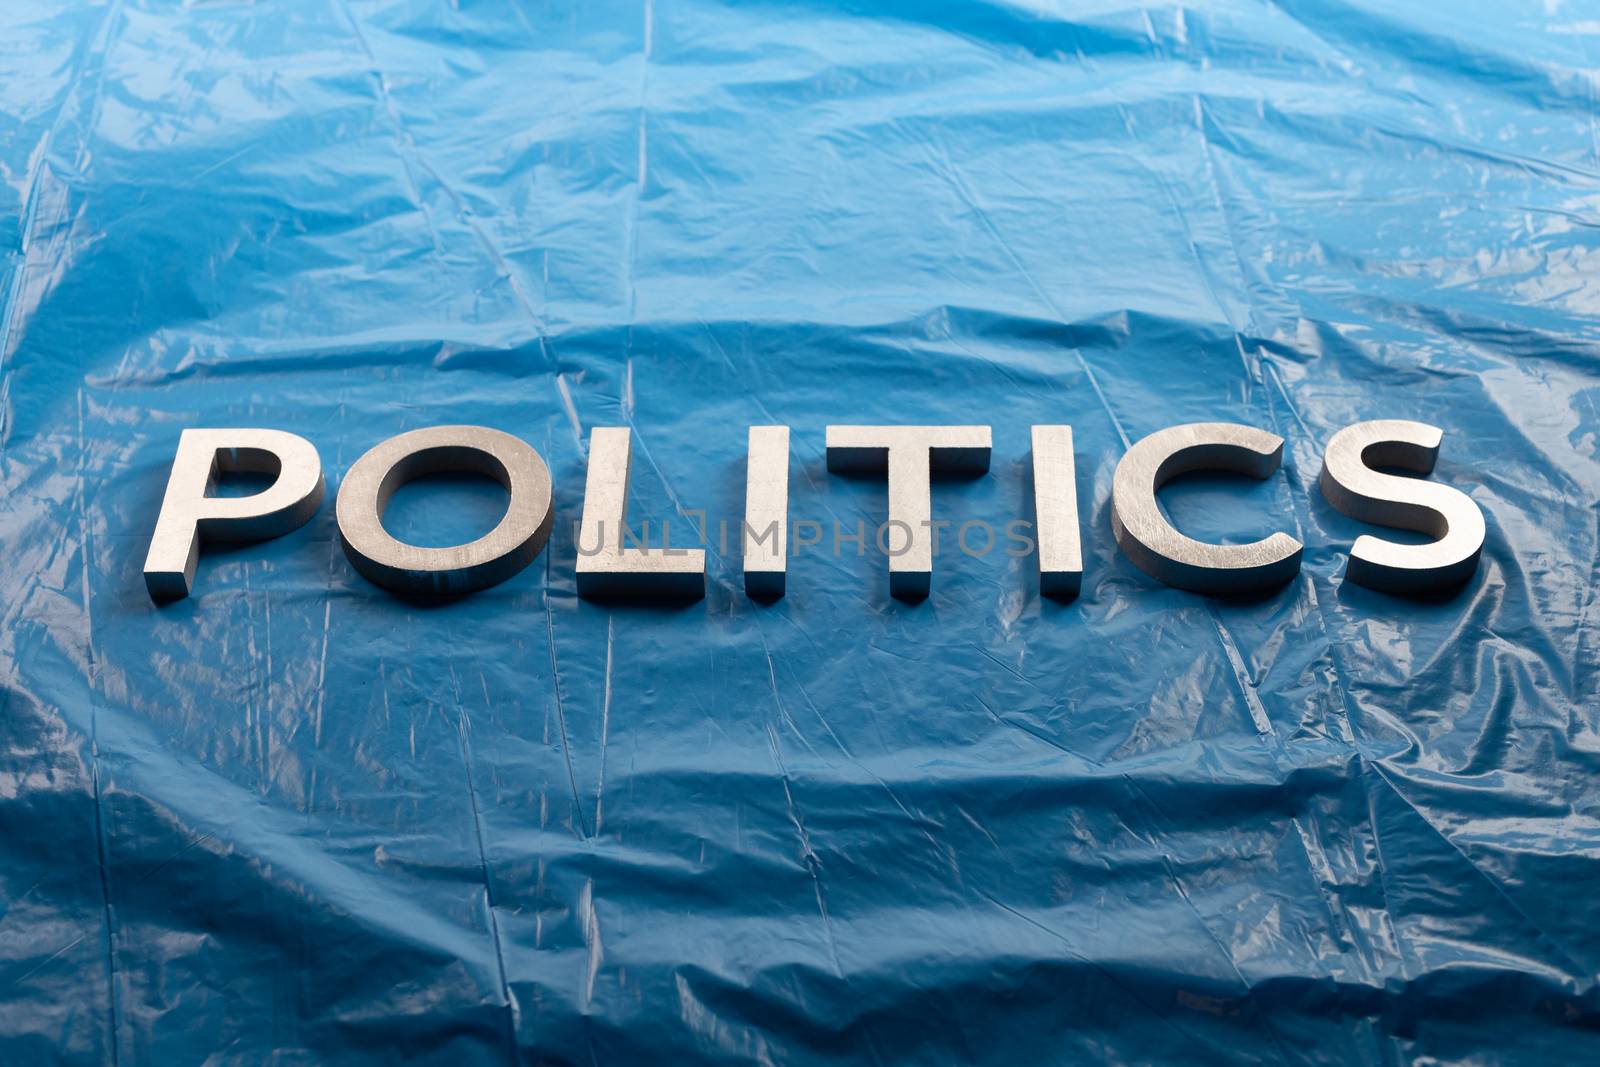 the word politics laid with silver aluminium letters over crumpled plastic blue film background - in center of picture by z1b